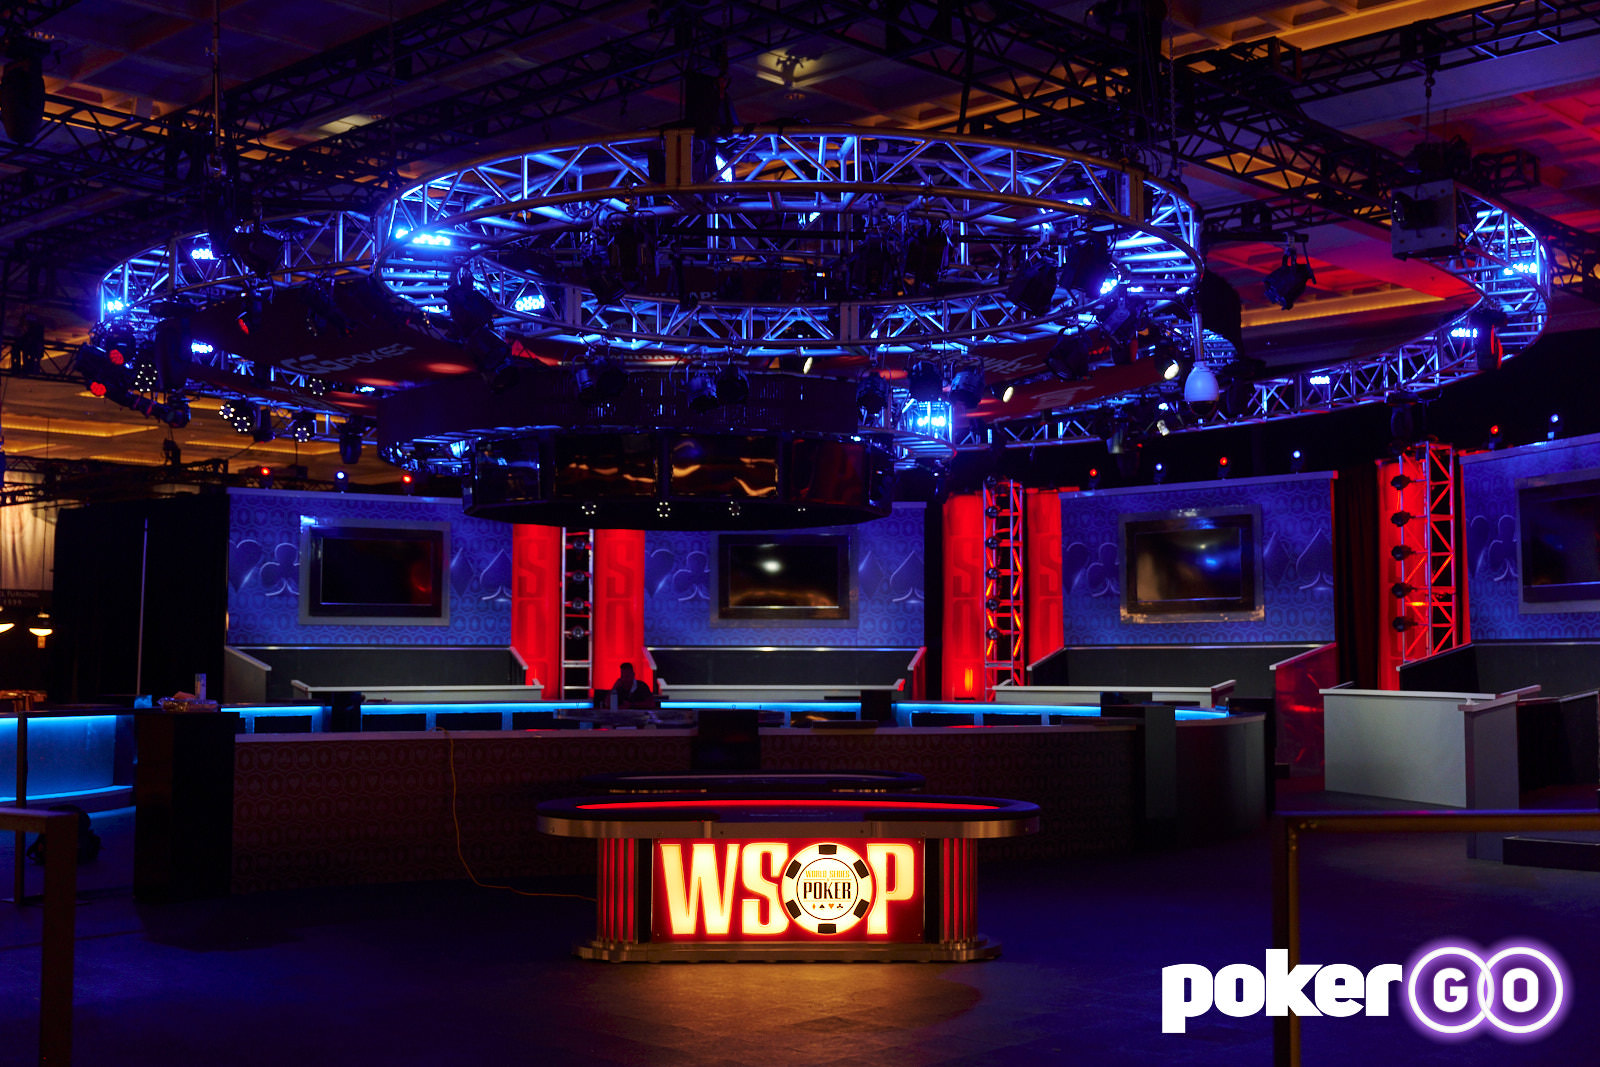 WSOP Main Event Livestream Kicks Off Today with Wall-to-Wall Coverage on PokerGO